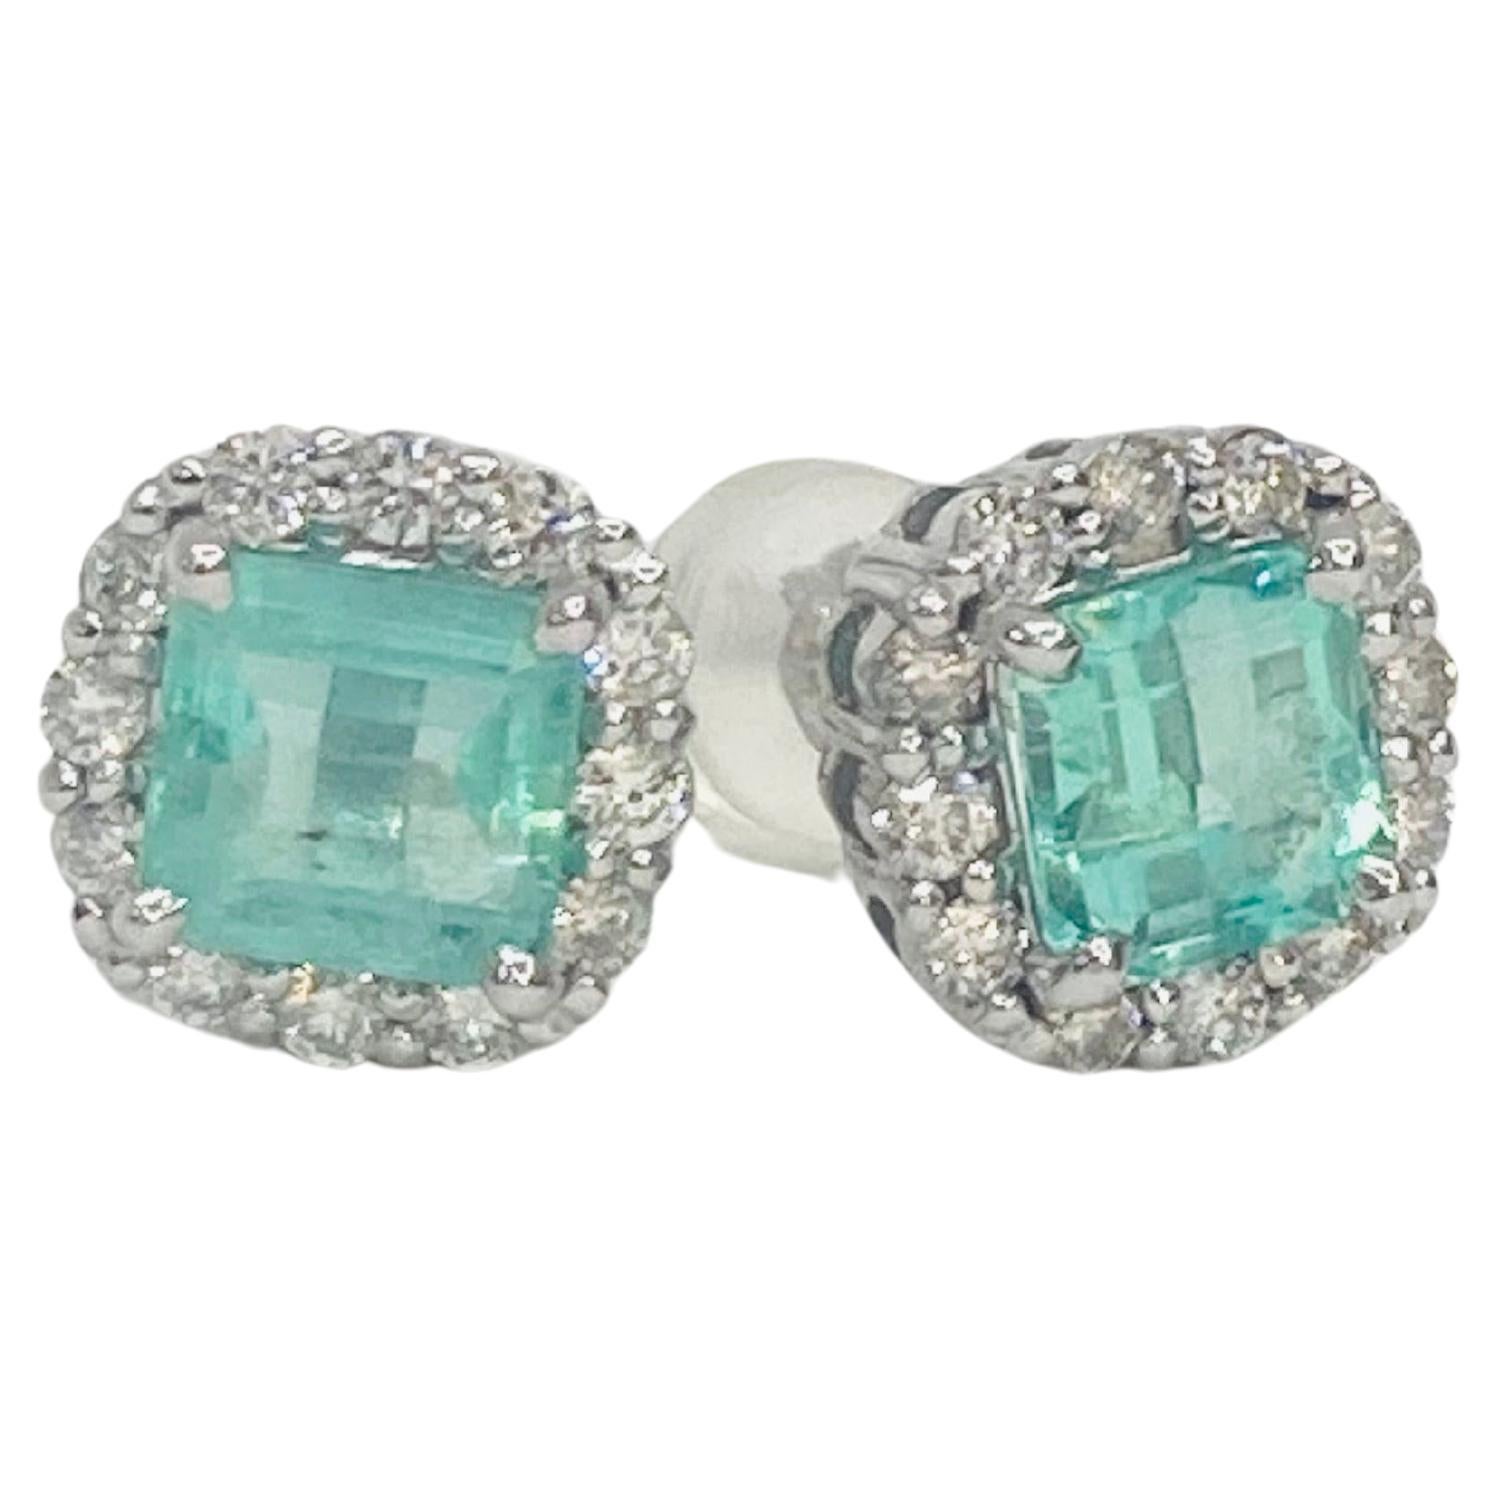 Bochic “Retro Vintage” Colombian Emeralds & Diamond Cluster Stud Earrings
Natural Green Emerald Square cuts from Colombia 
1.65 Carat 
Diamonds 0.36 Carat 
F color 
VS clarity 
18K White Gold
2.5 Gram

This Earrings are from the 